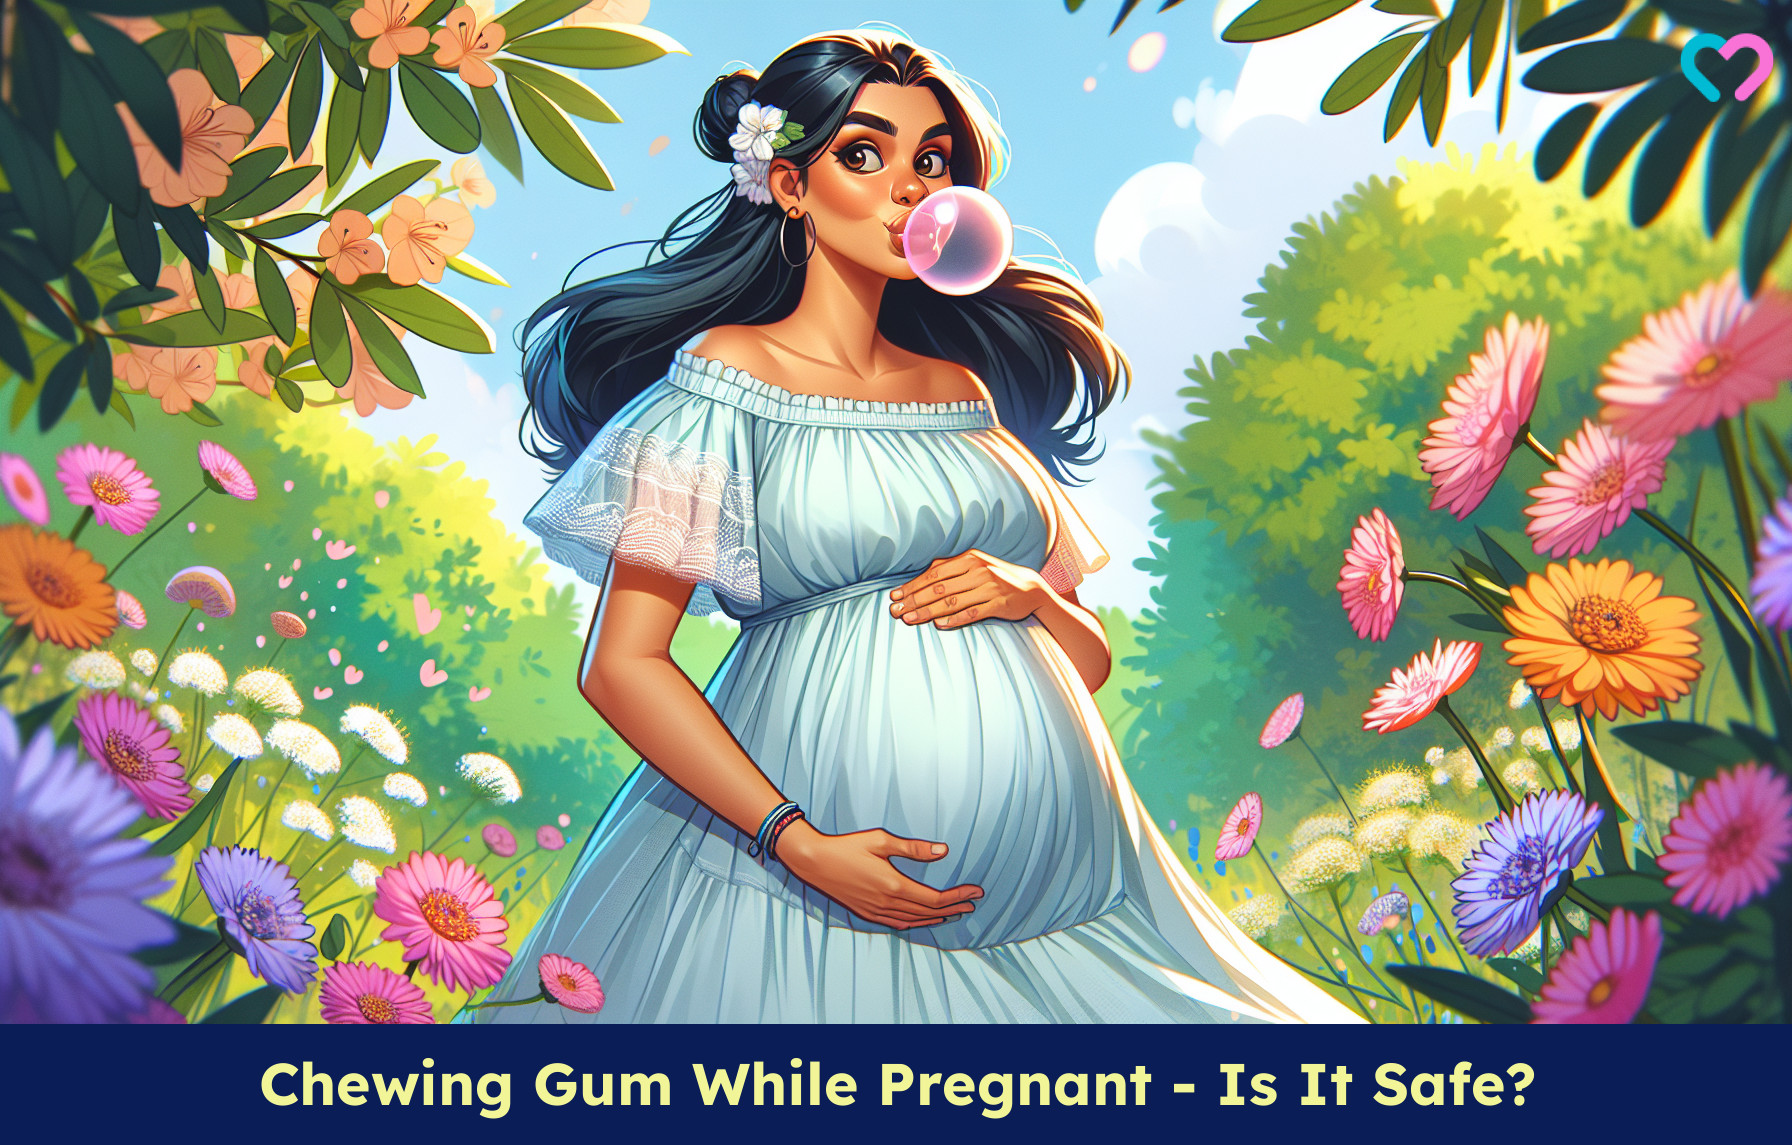 Chewing Gum While Pregnant - Is It Safe?_illustration